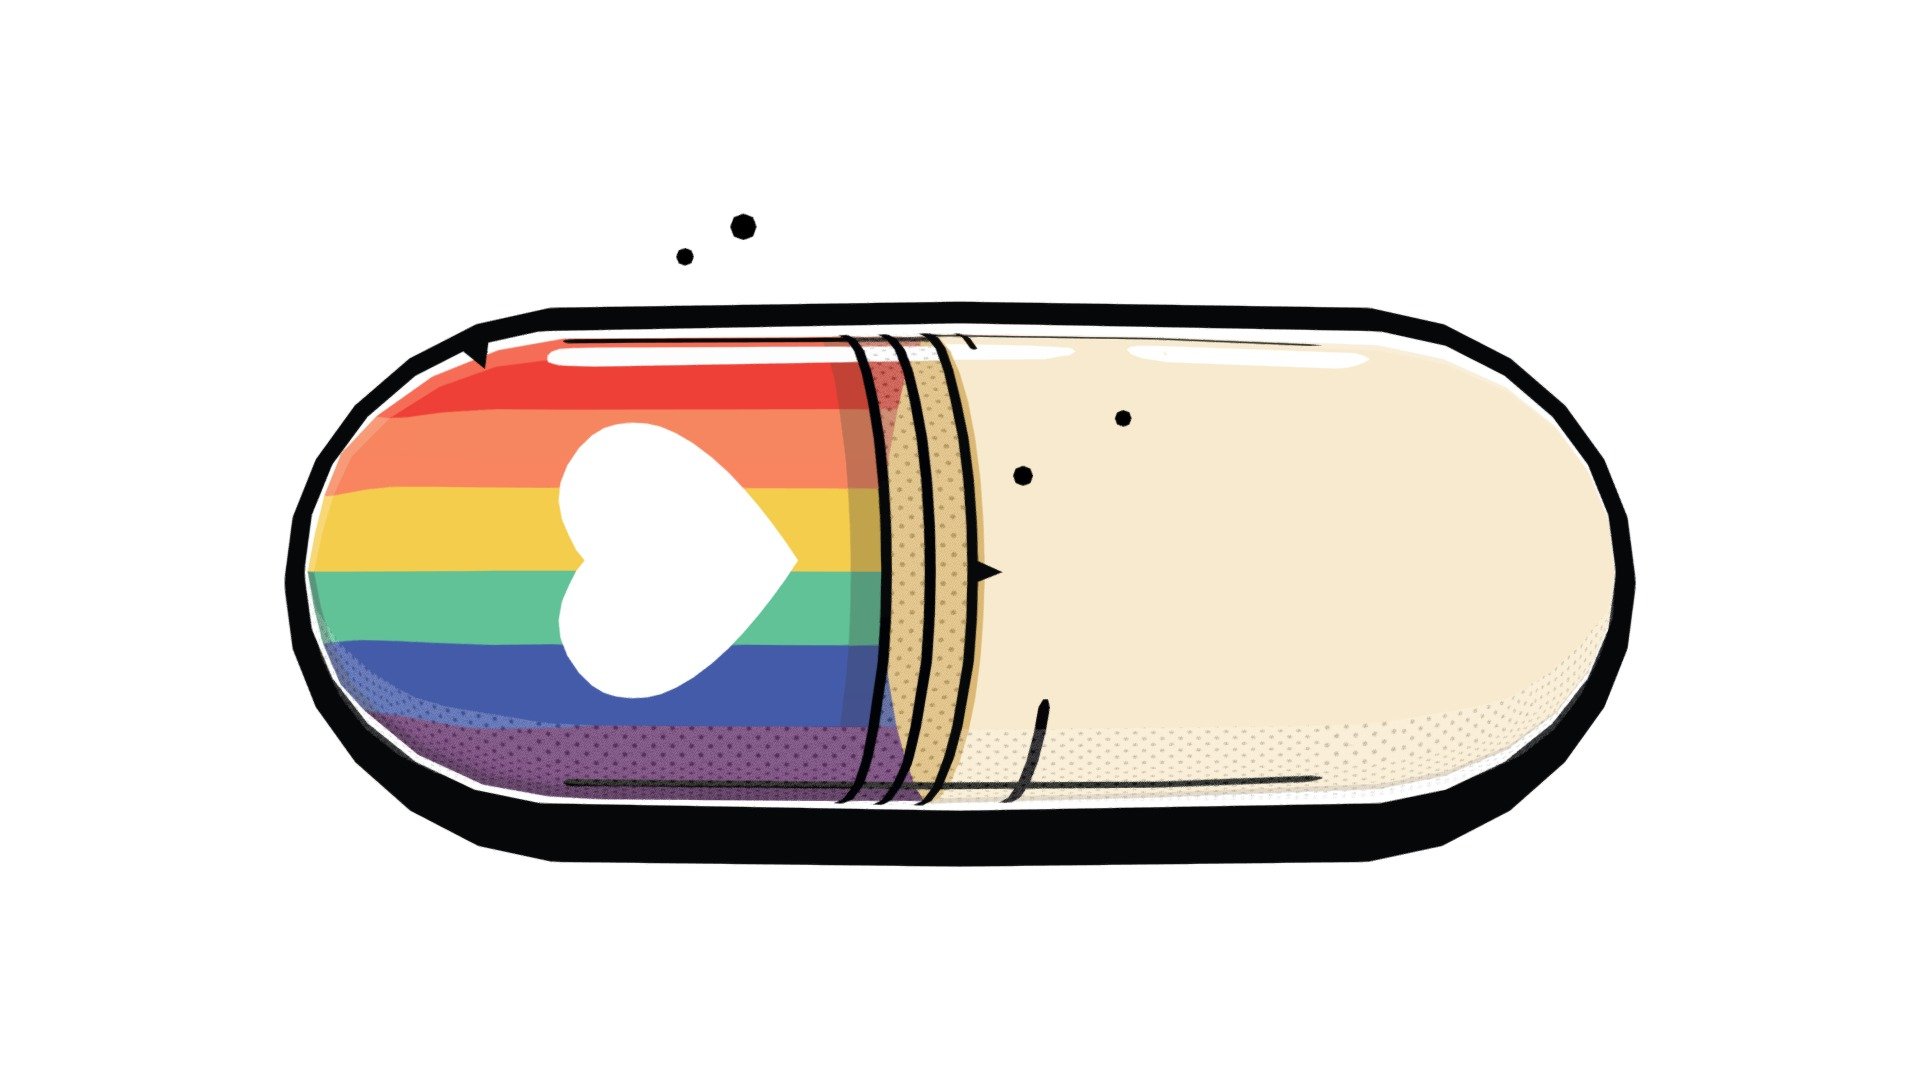 My submission for the Sketchfab Weekly Challenge- Based on this illustration
https://dribbble.com/shots/18572922-Pride-Pill - Daily Dose of Rainbow - 3D model by selenkoyunoglu 3d model